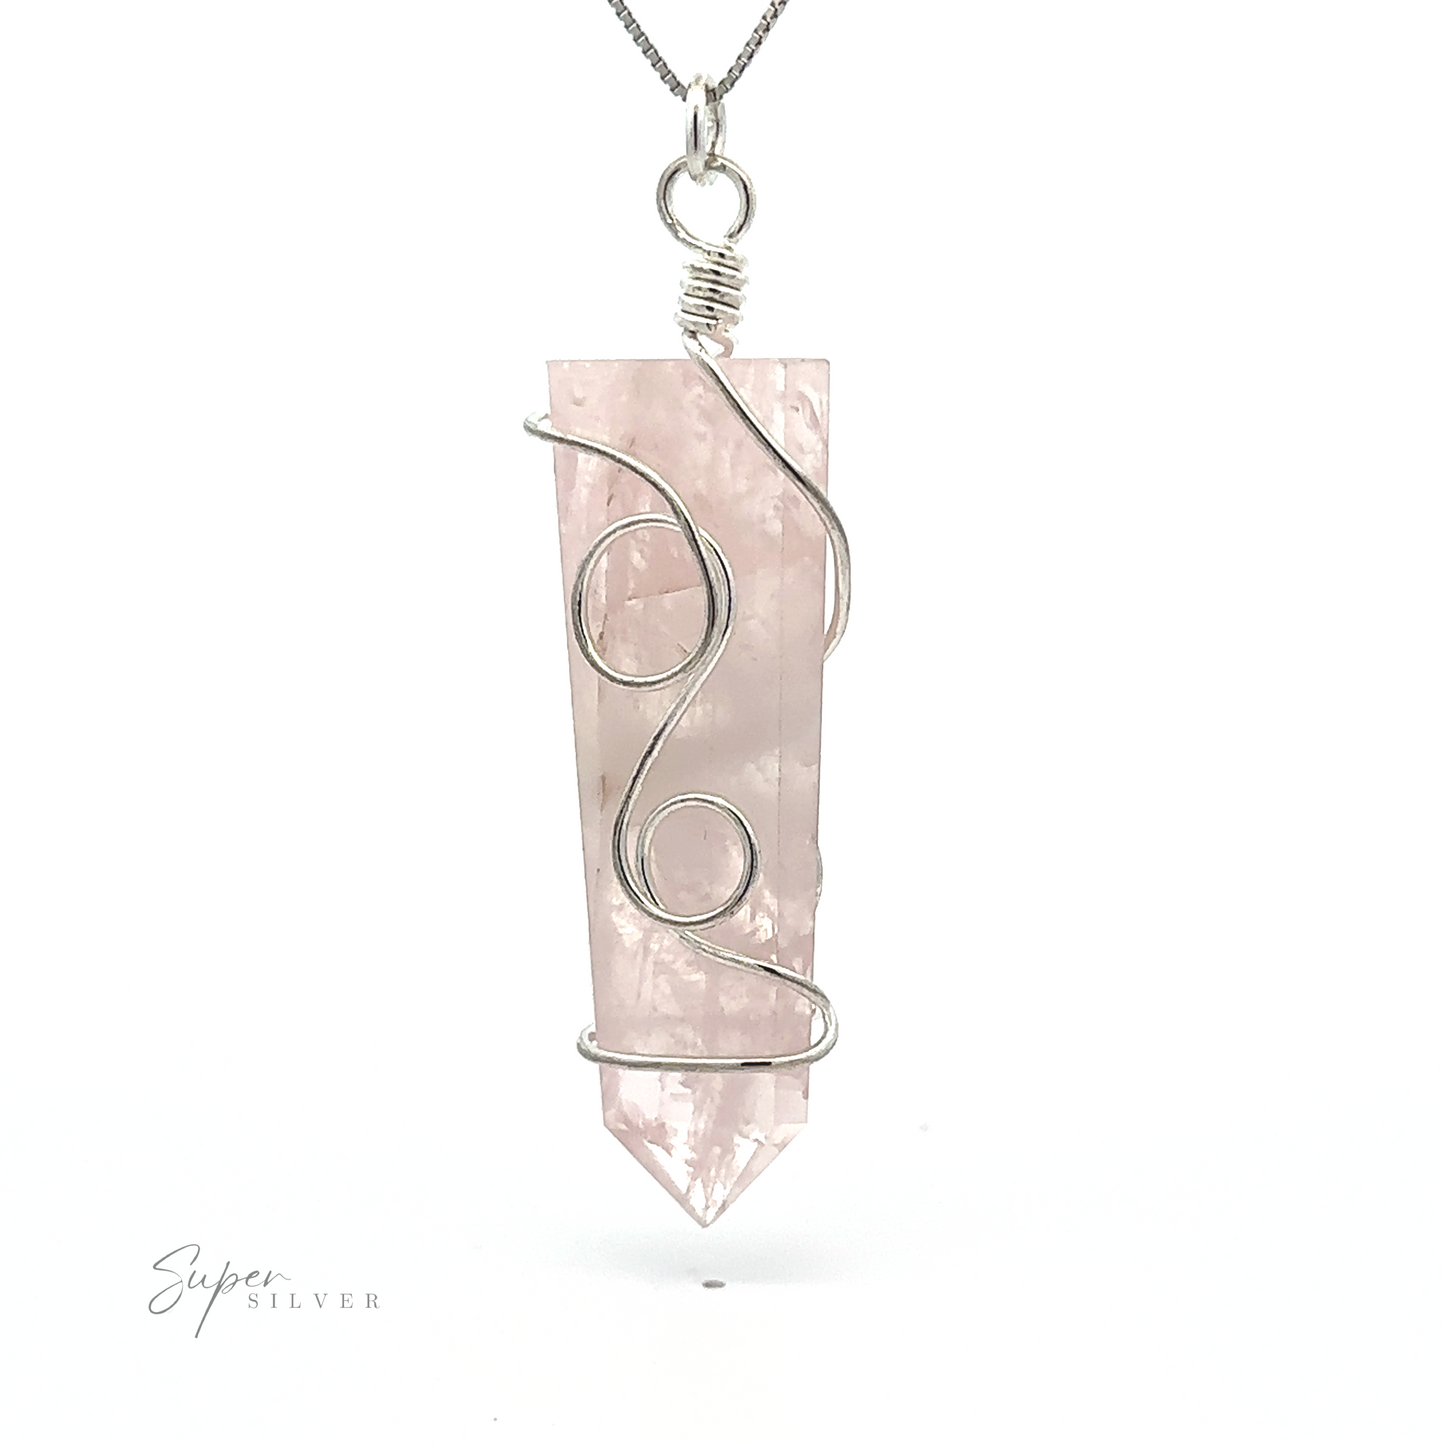 
                  
                    A pendant with a pointed rose quartz crystal wrapped in silver wire is suspended from a chain, showcasing the Stone Slab Pendant with Wire Wrapping. The words "Super Silver" are visible in the lower left corner.
                  
                